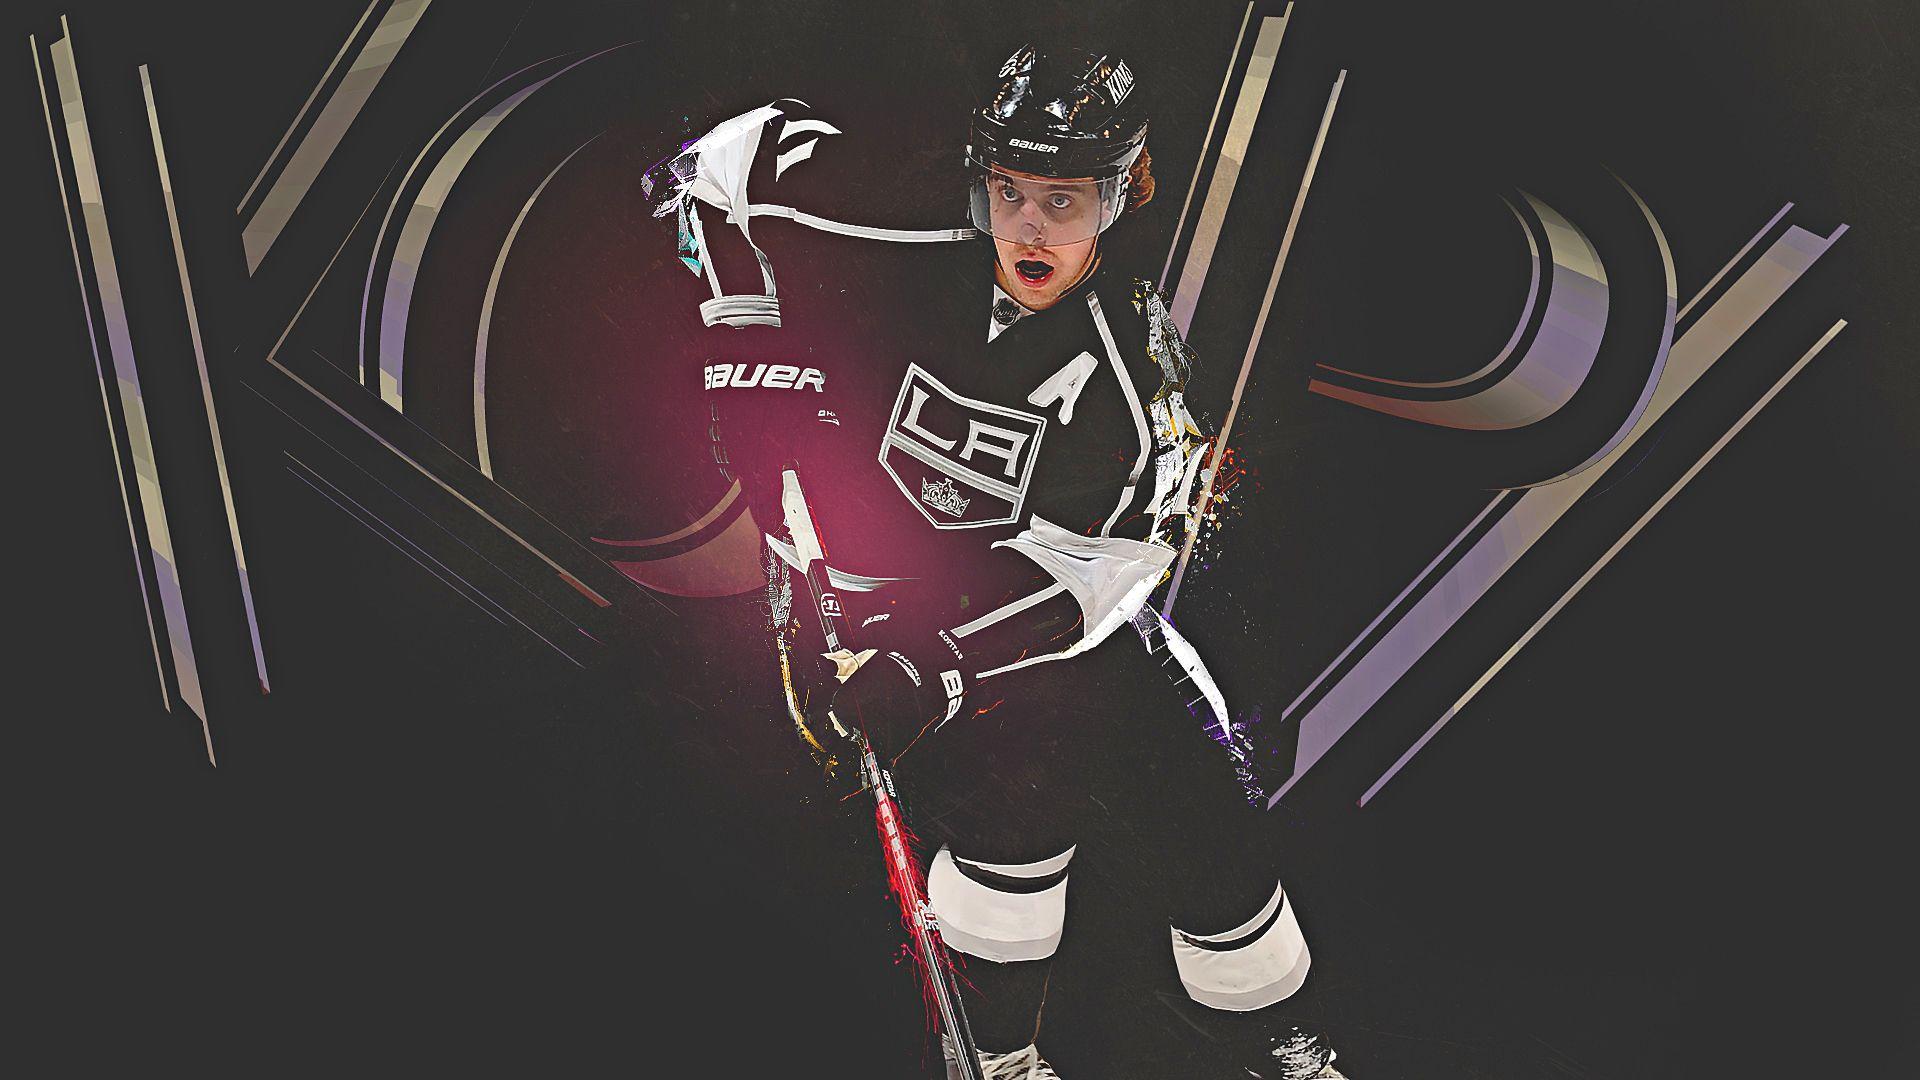 Anze Kopitar on black background wallpaper and image